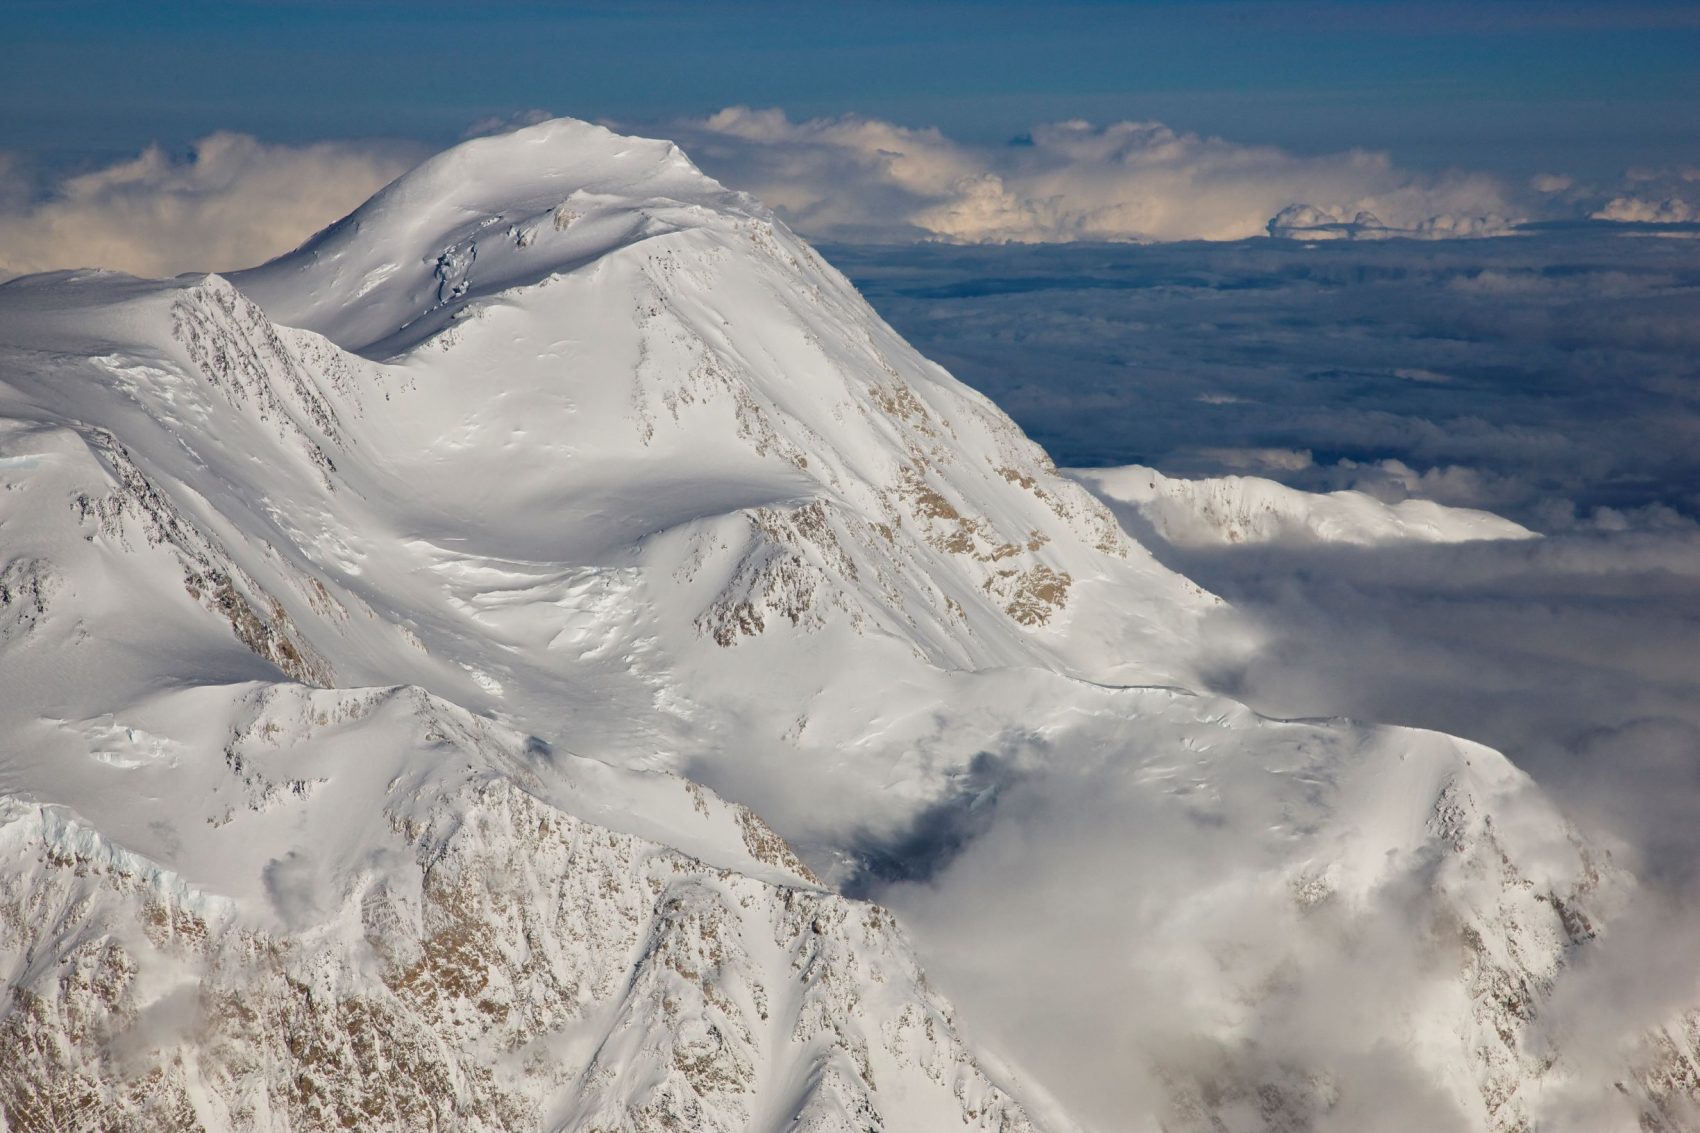 Upper slopes of Denali ( Mount Mckinley ) in Alaska - the highest mountain in the USA and North America